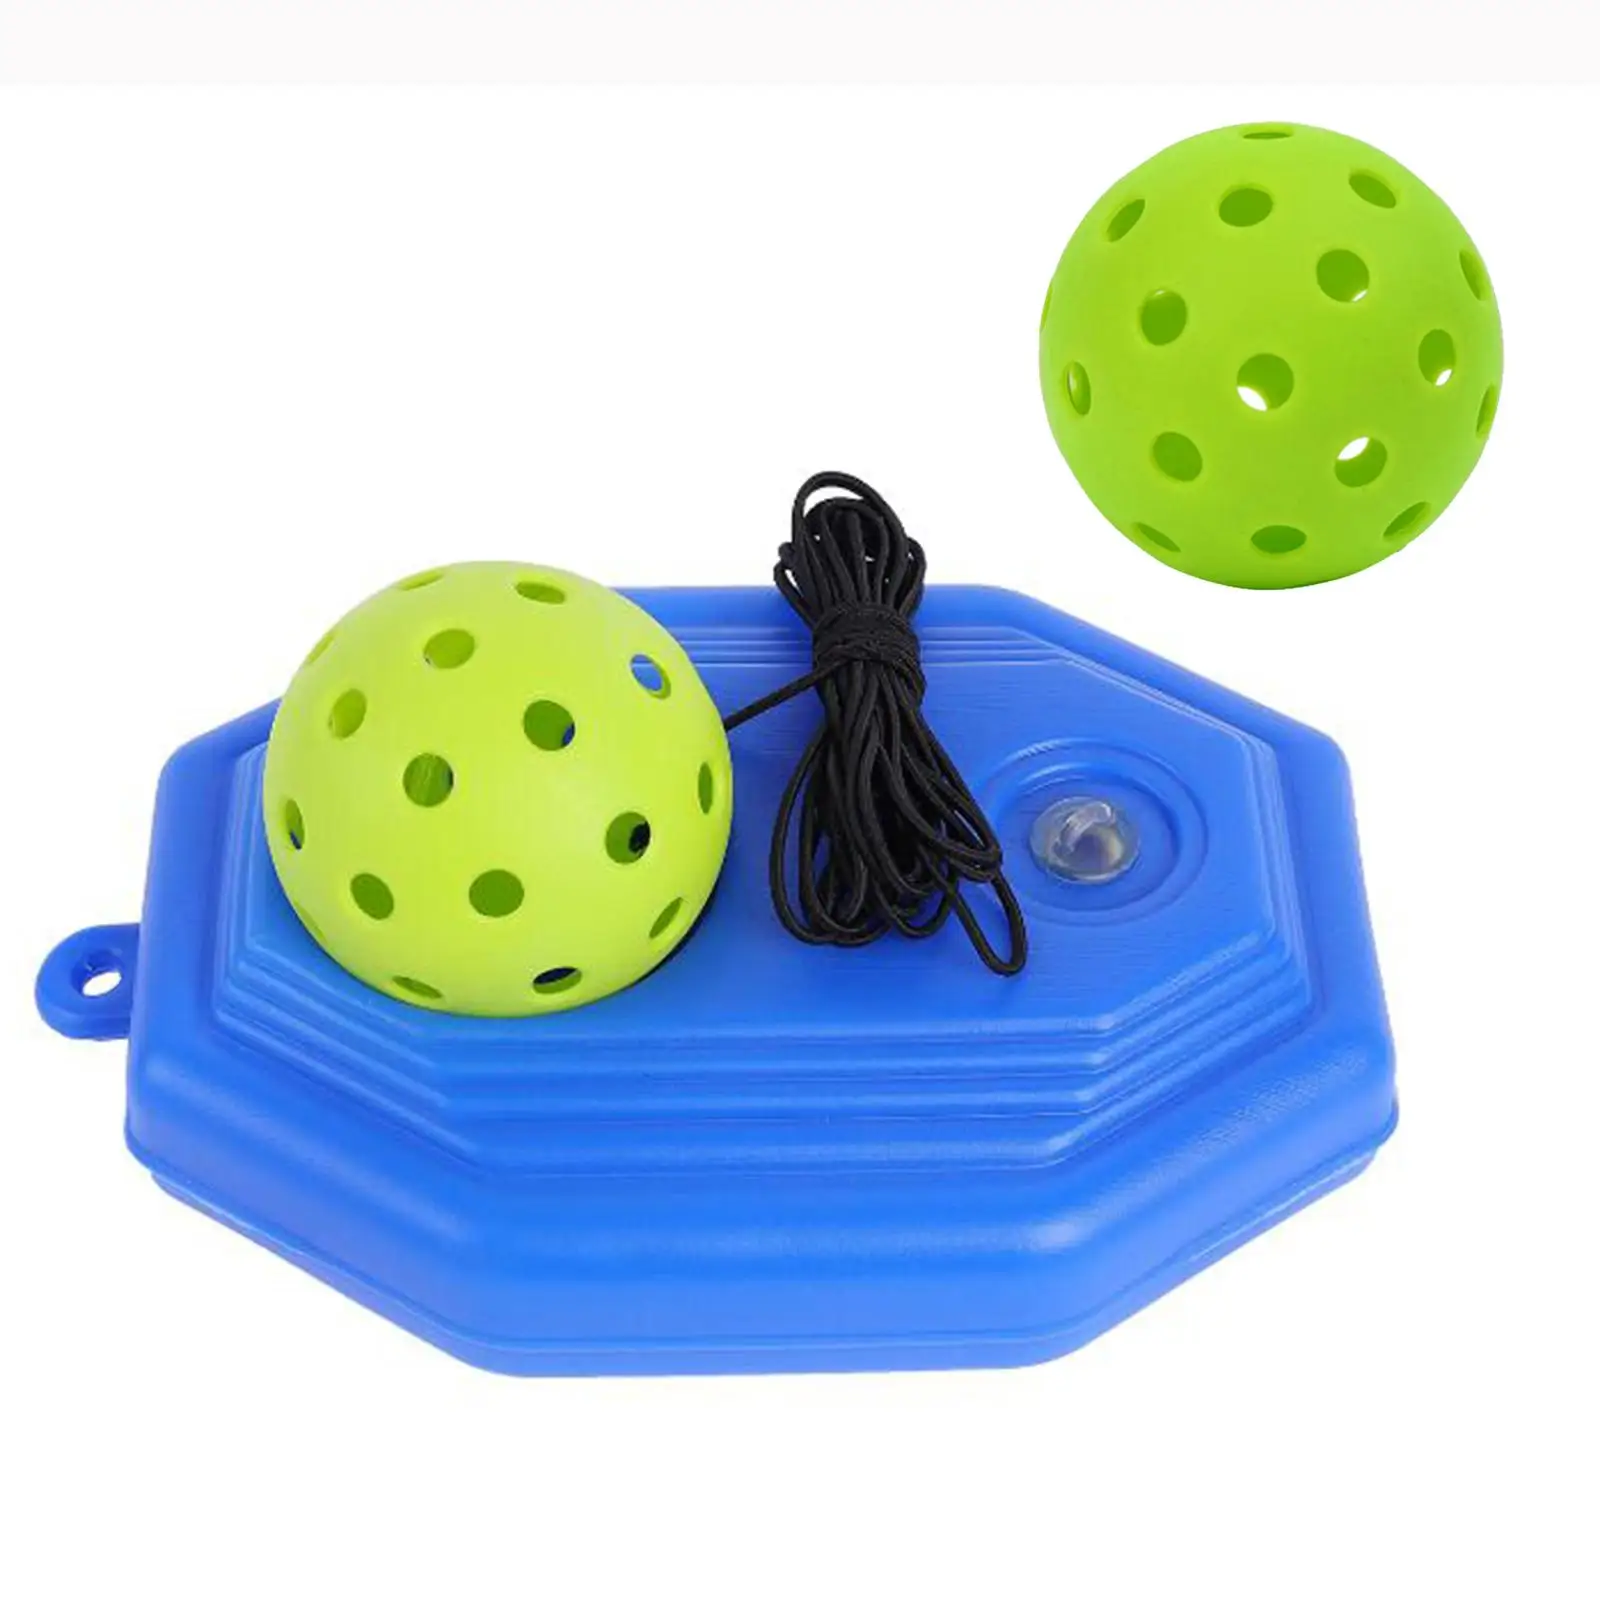 Pickleball Trainer Pickleball Ball with Cord Baseboard Professional Pickleball Training Aid for Single Player Solo Training